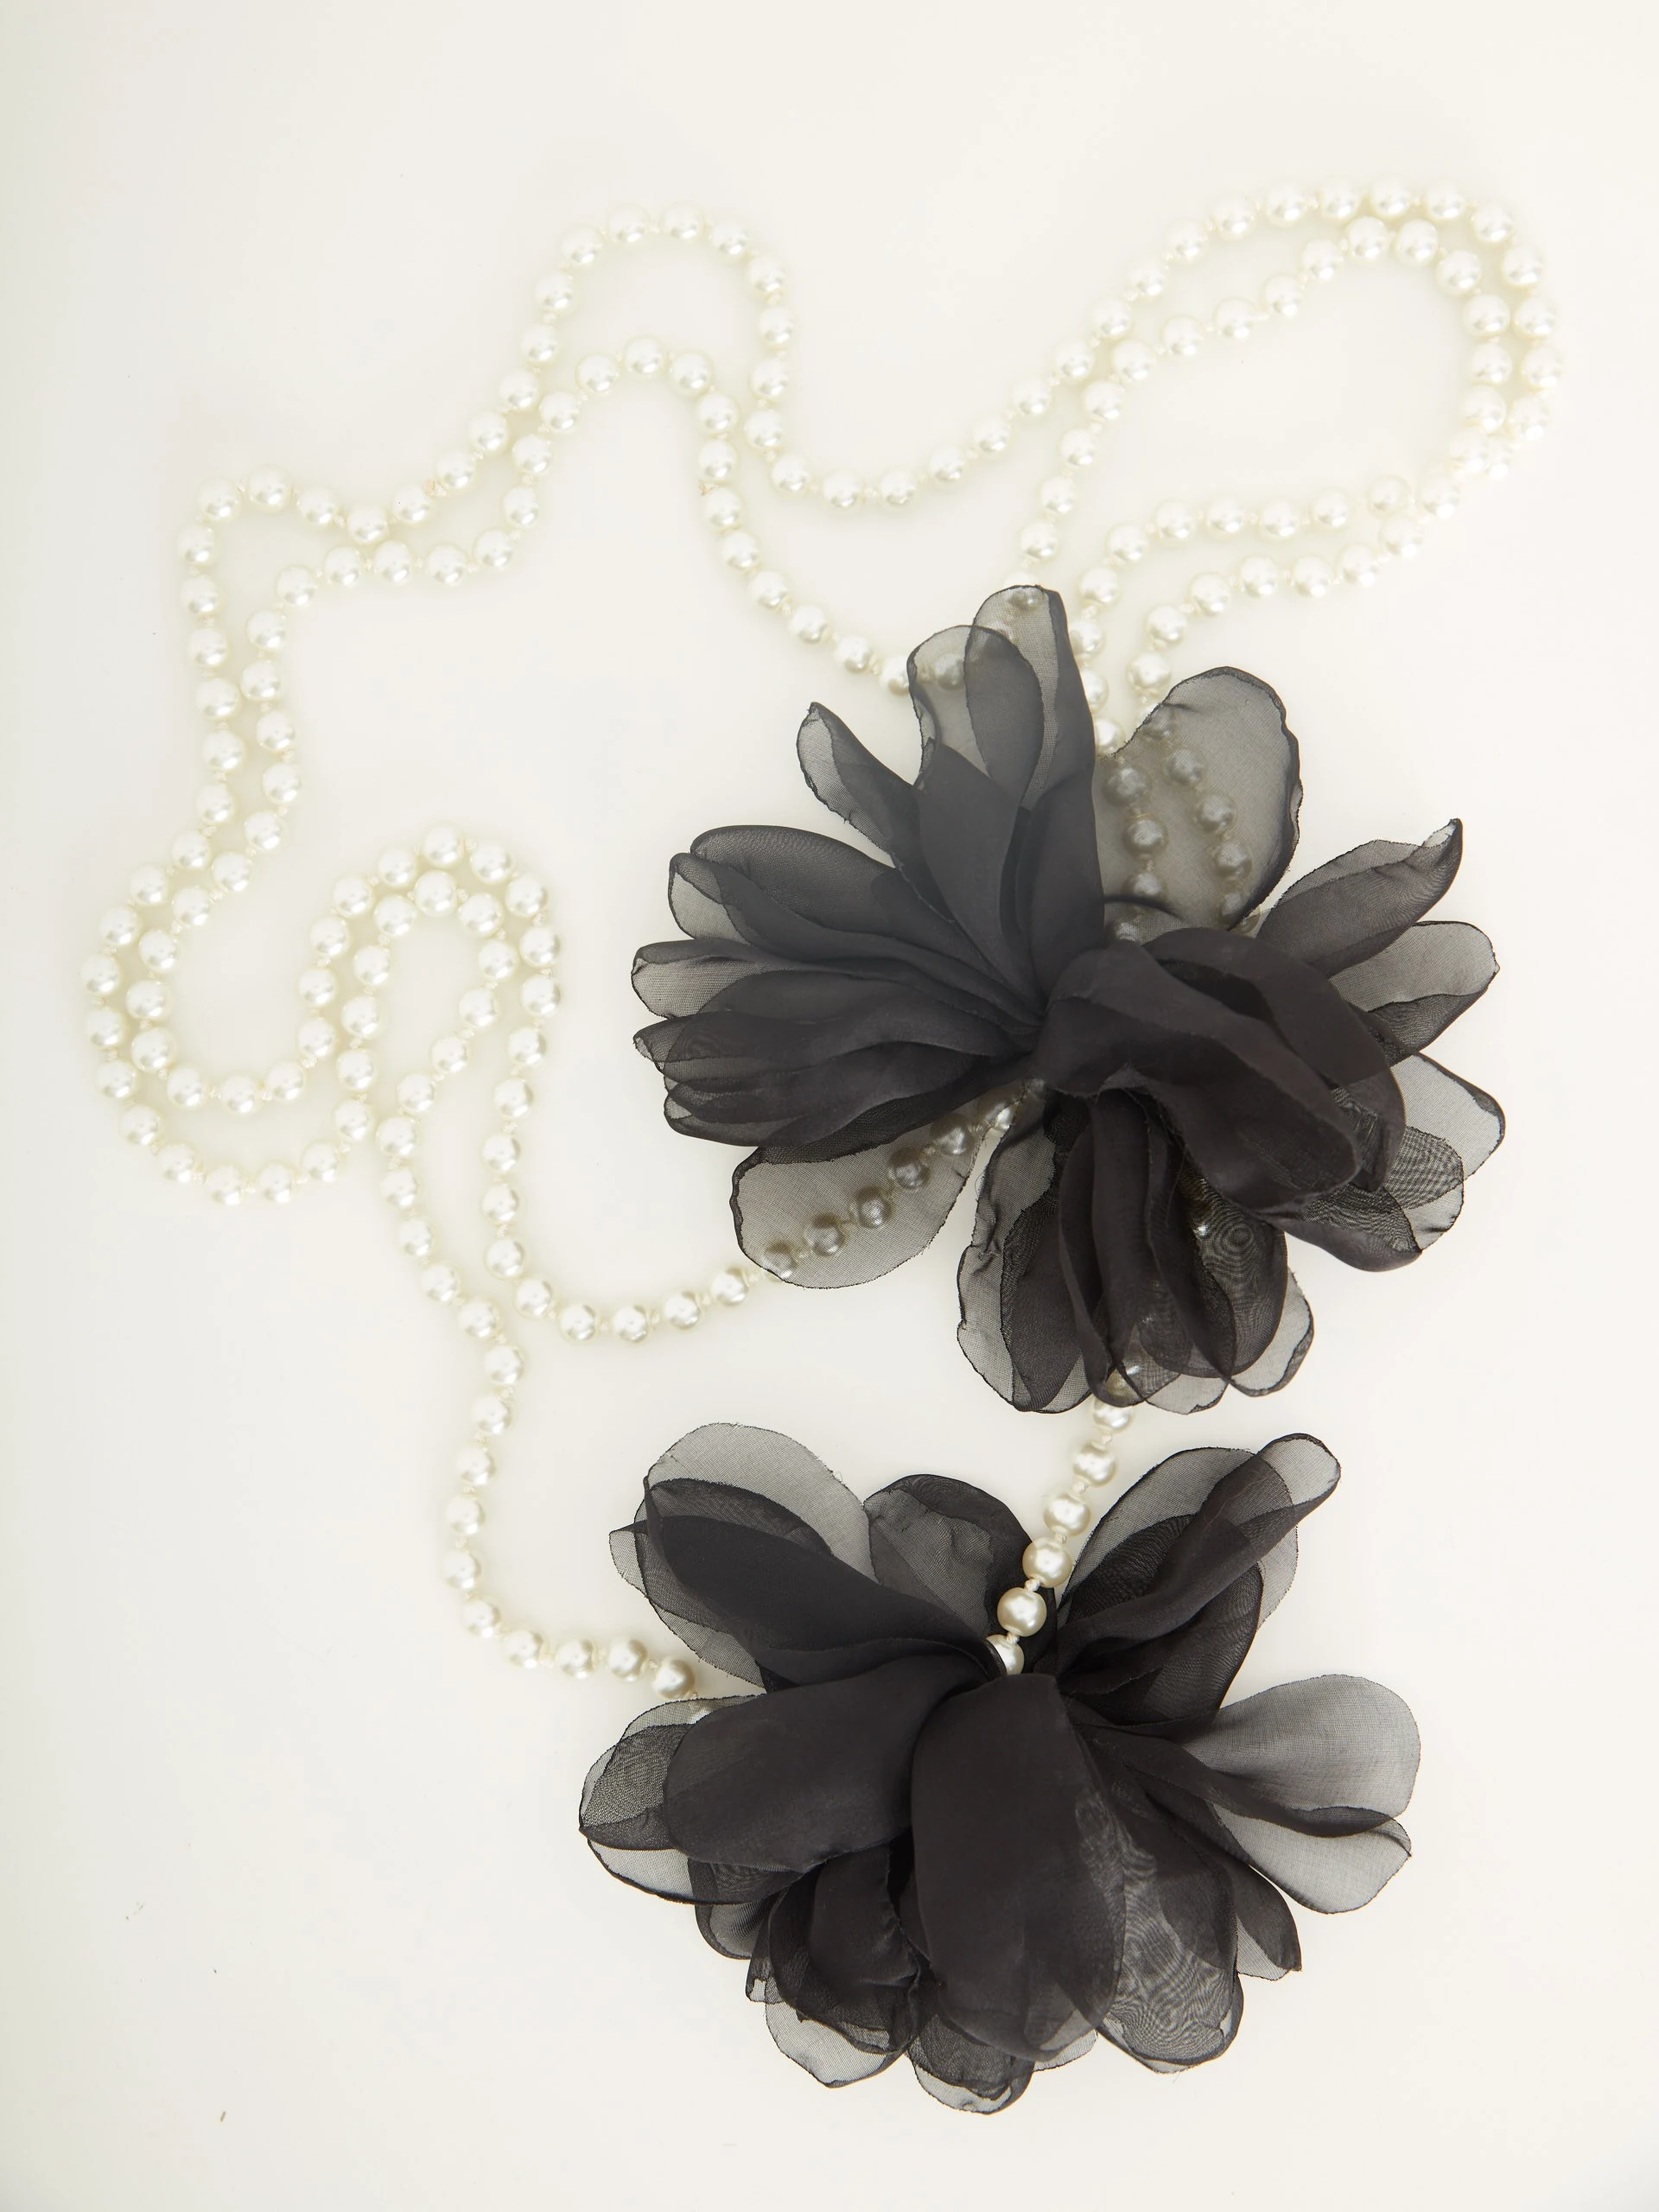 Pearl necklace with decorative flowers